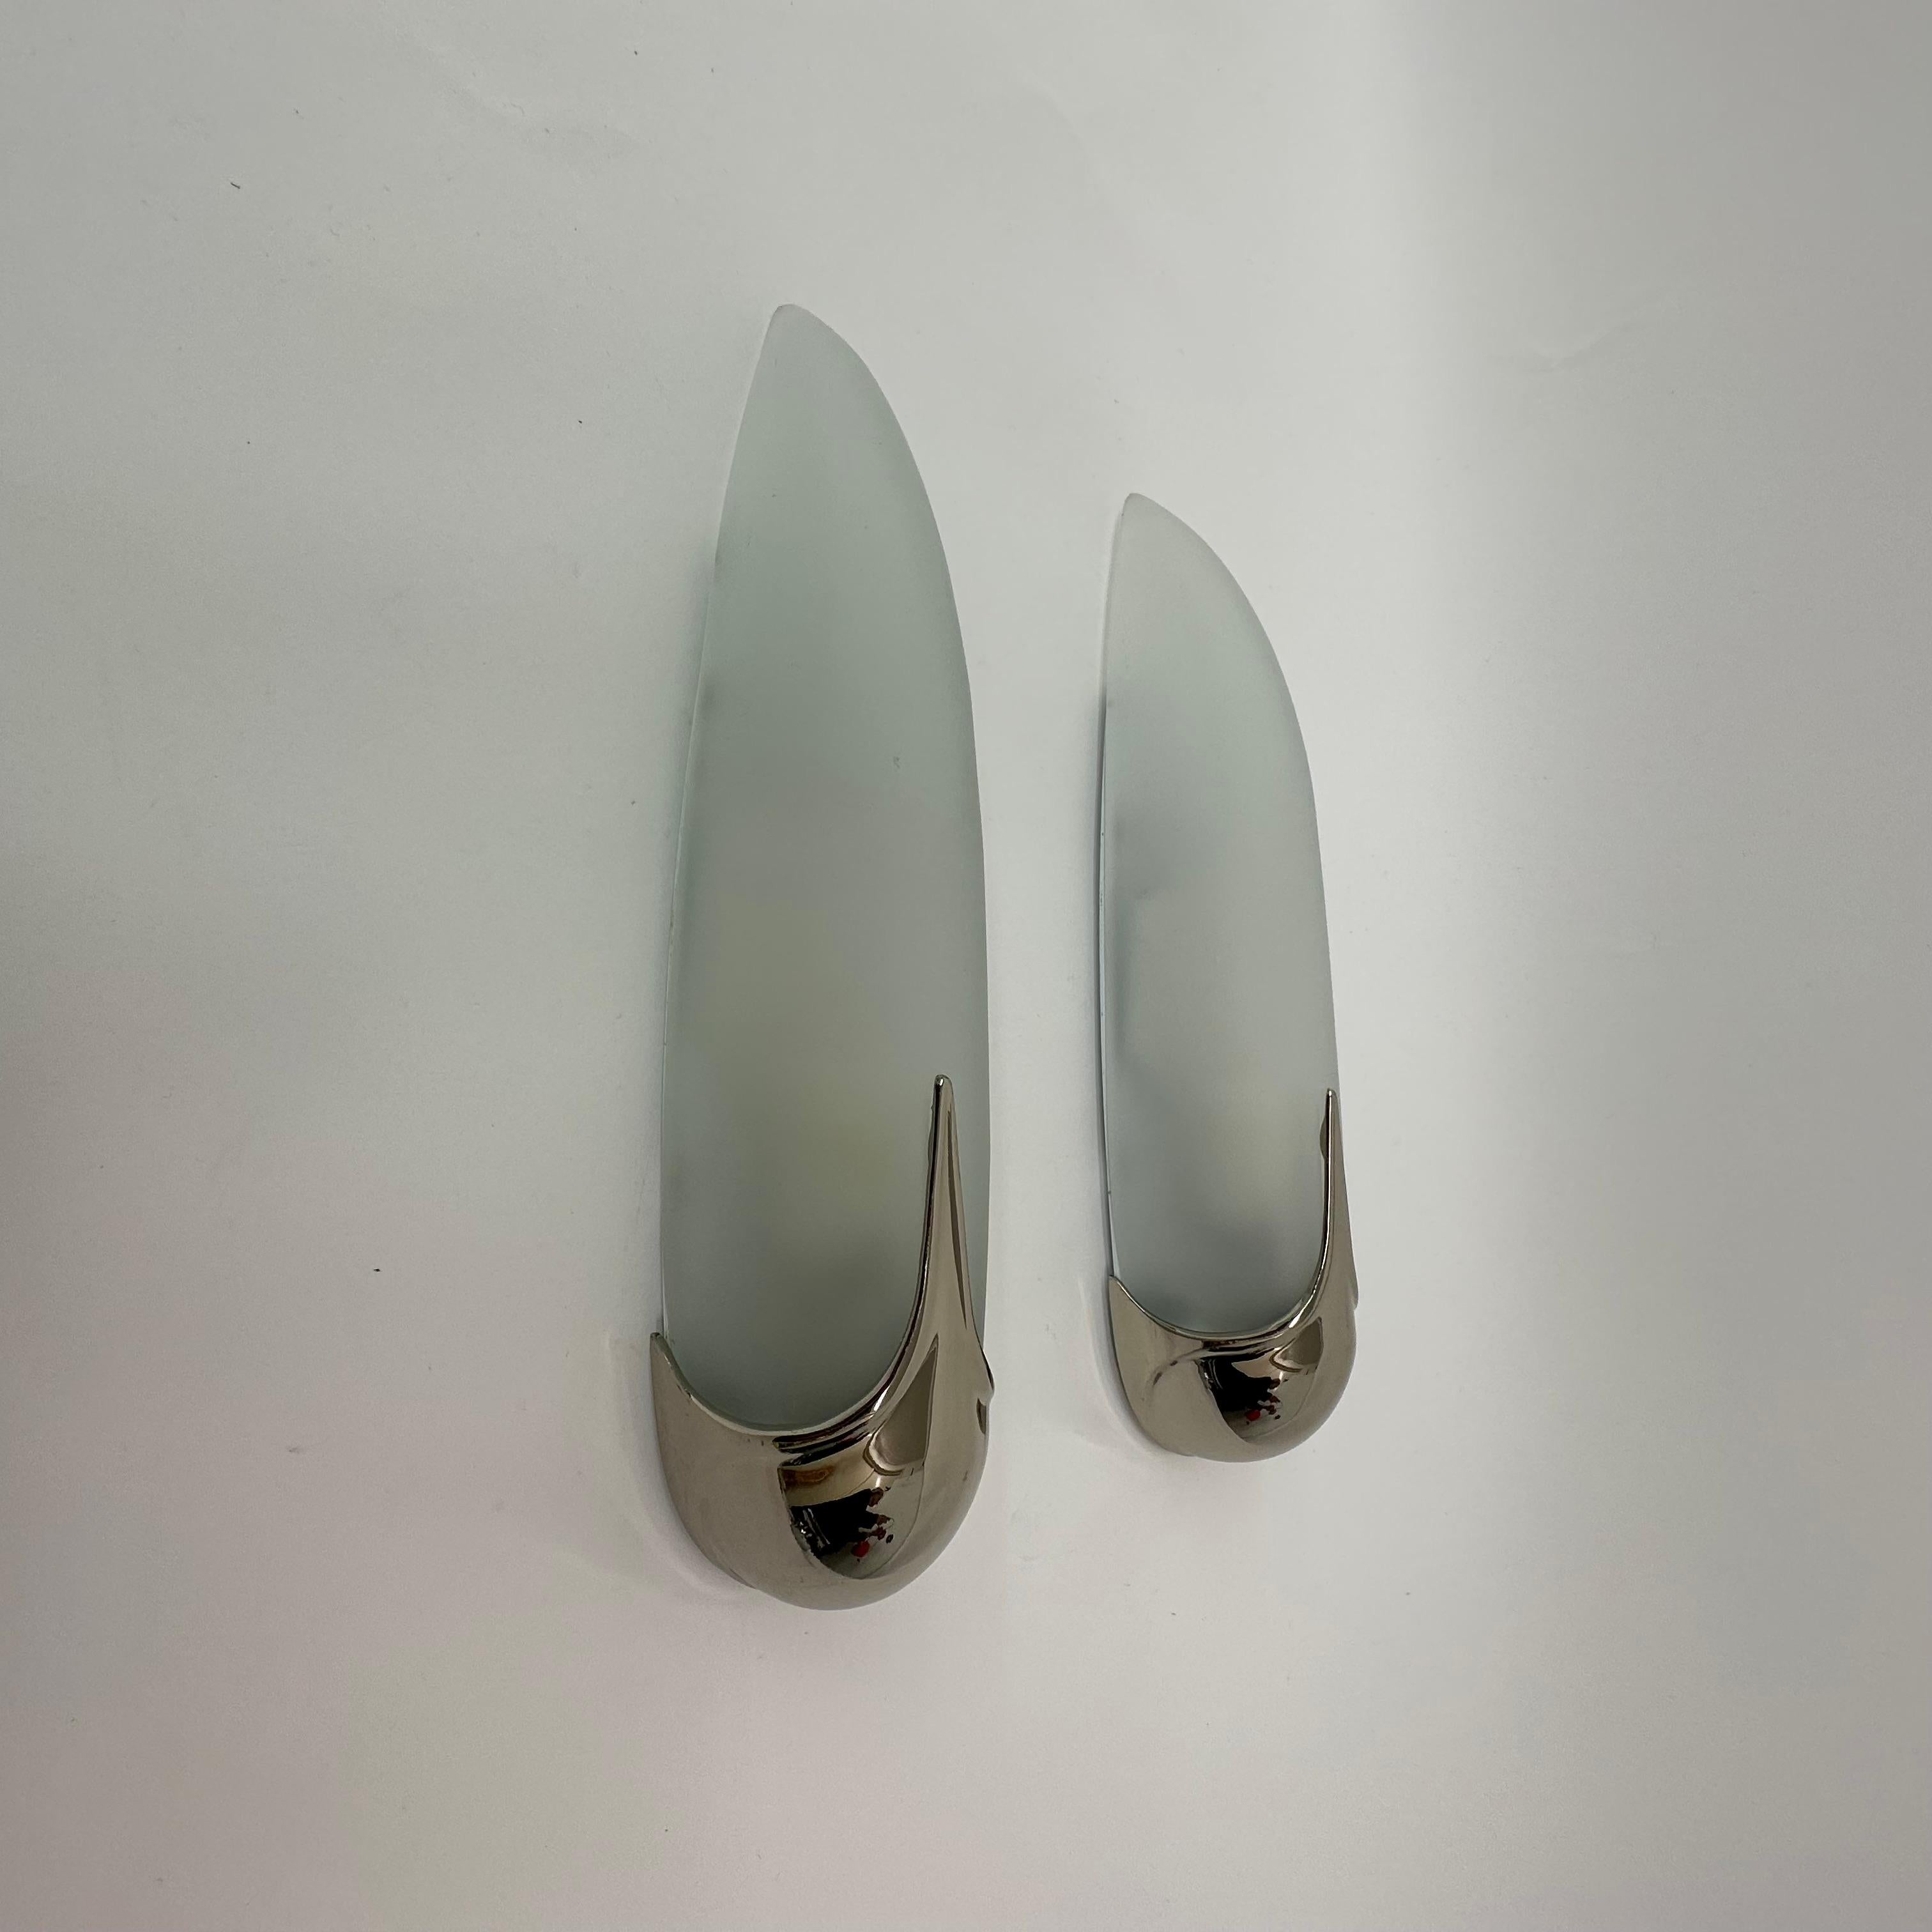 Pair of Idearte Sconces Wall Lamps, Spain, 1980s For Sale 6